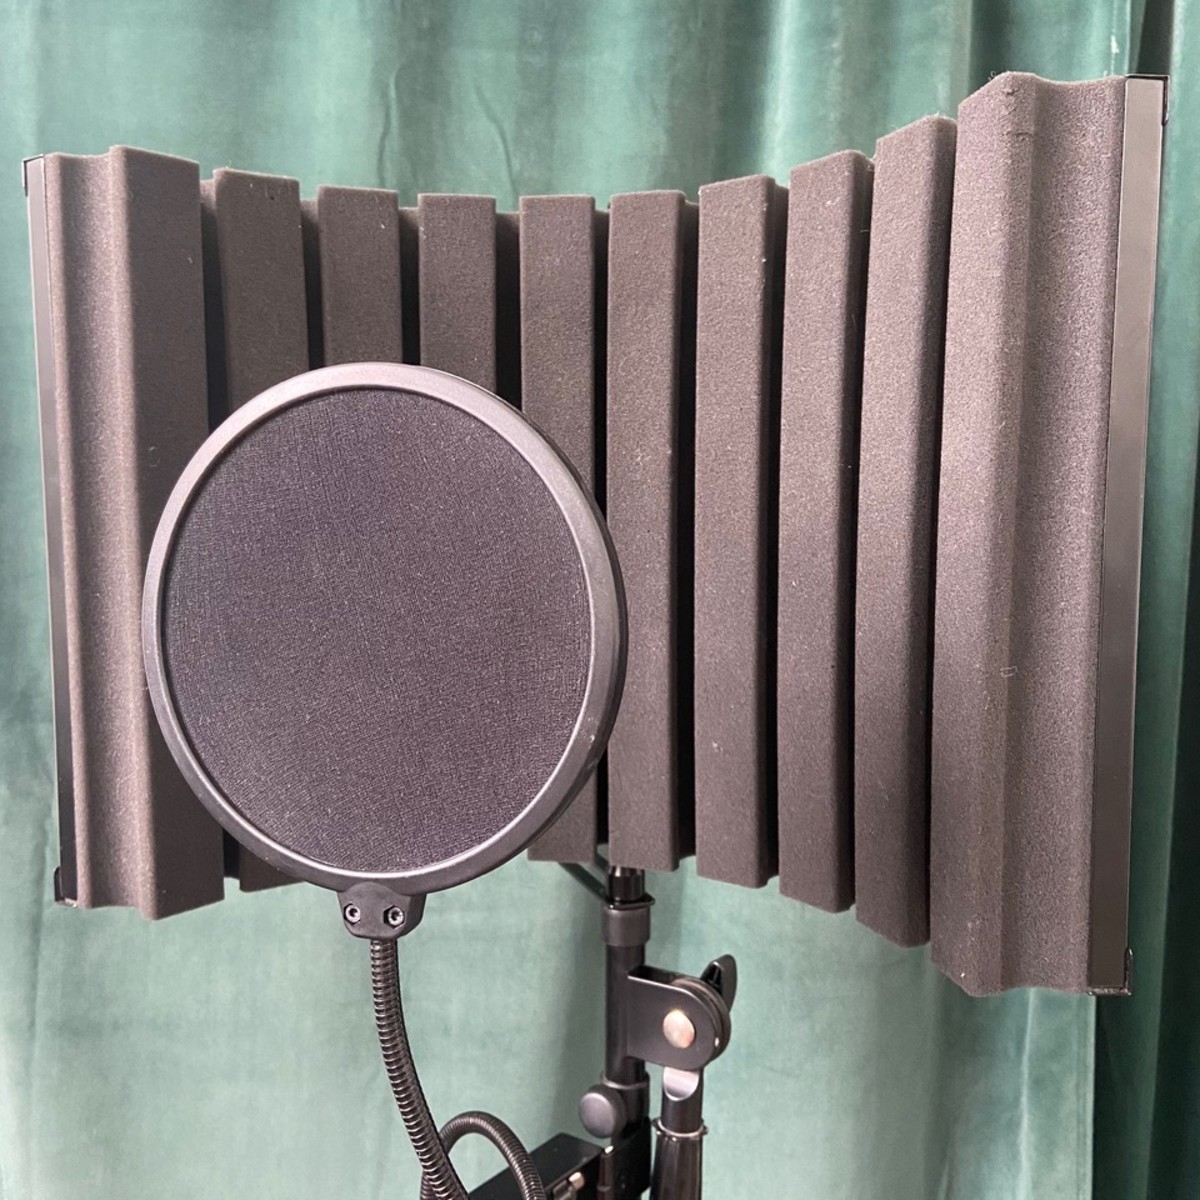 CAD VocalShield VS1 Foldable Stand-Mounted Acoustic Shield